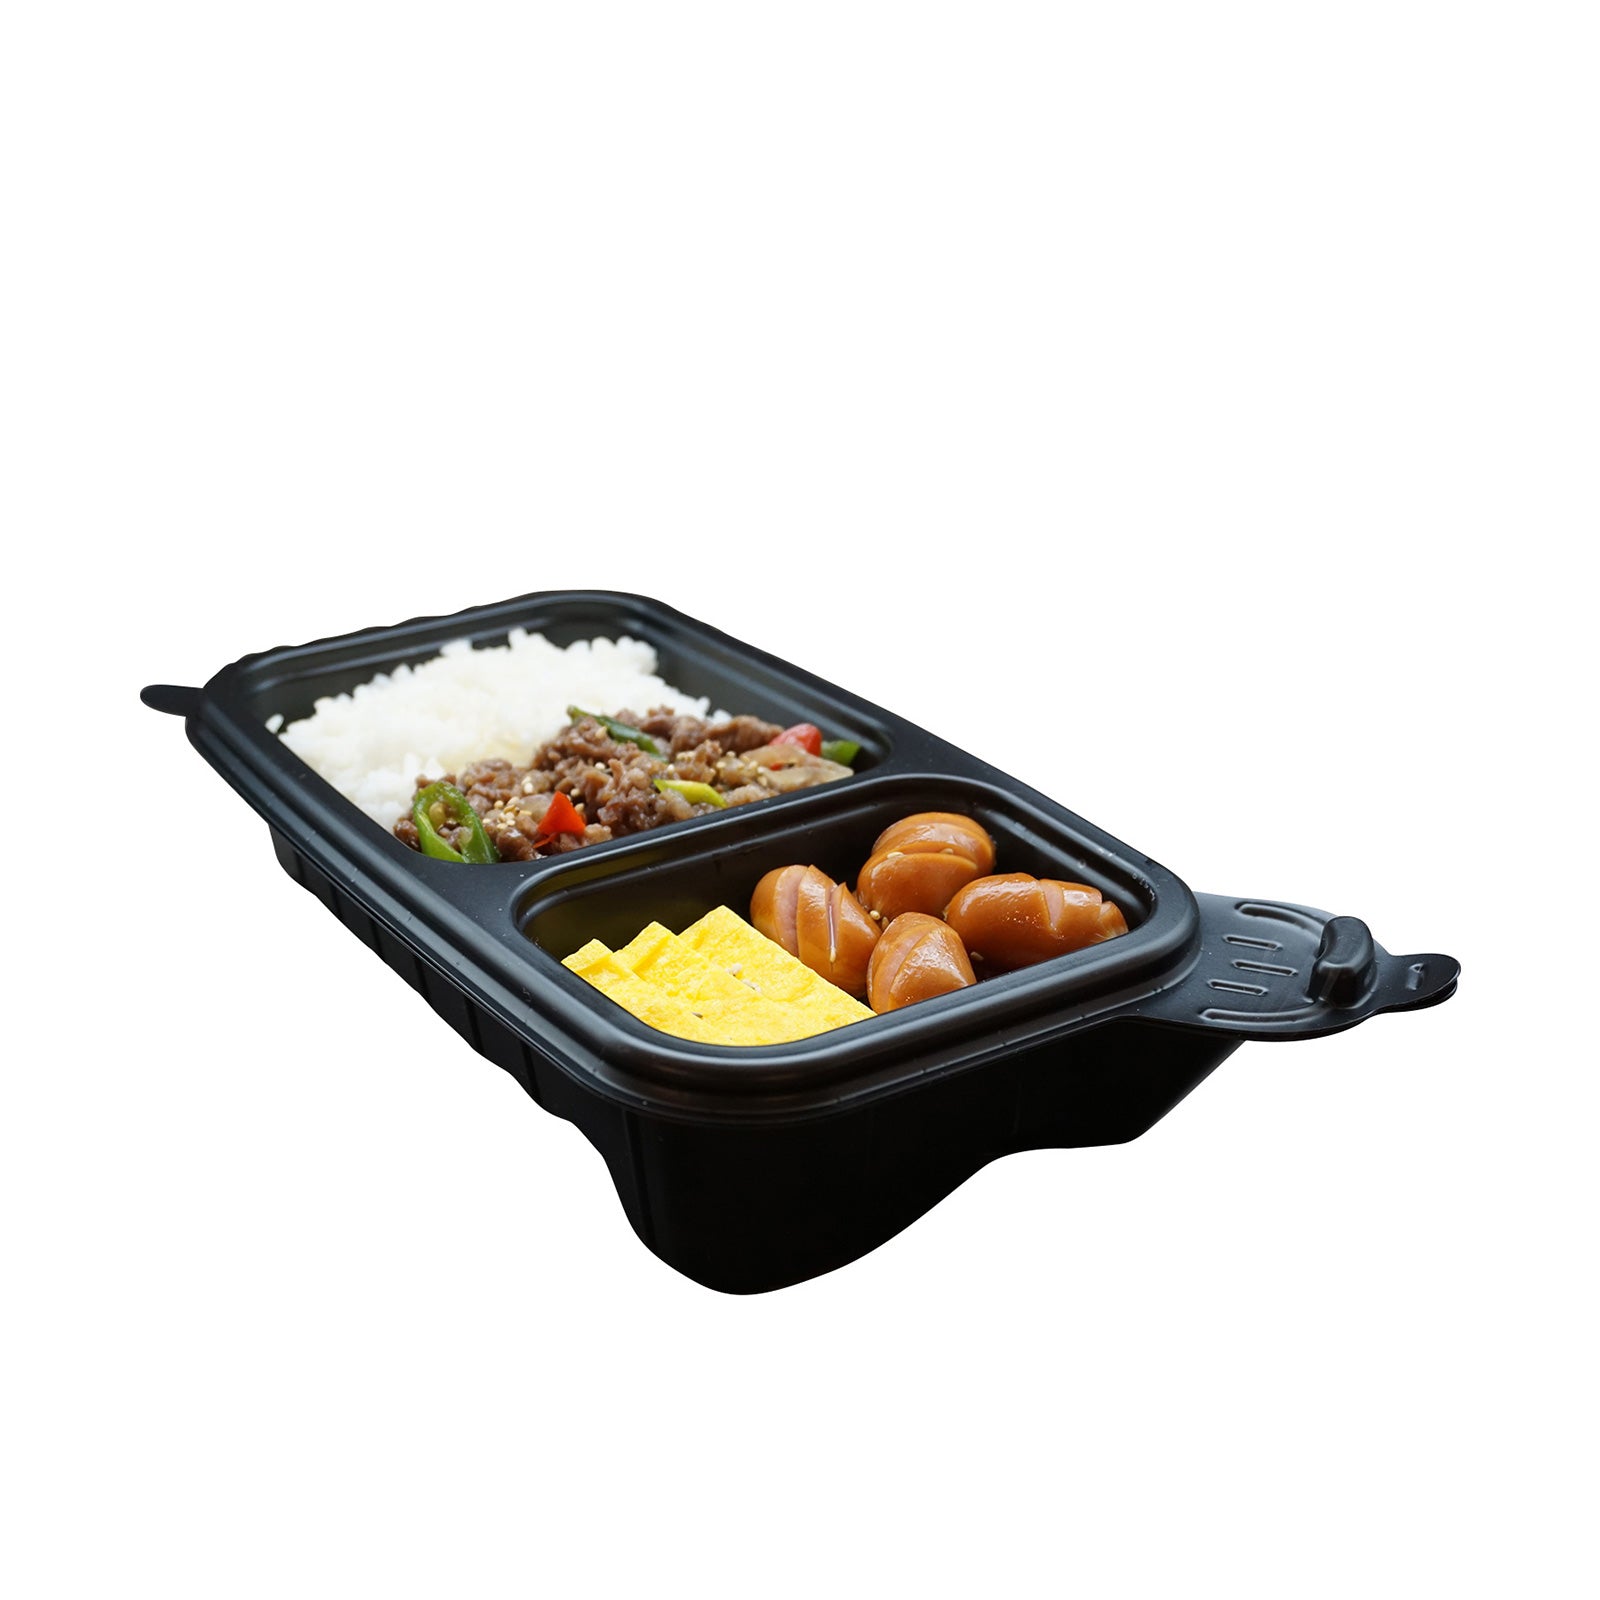 Sirak Food 60-Pack Dalat Heating Lunch Box Container 26cm B | Convenient Lunch Storage